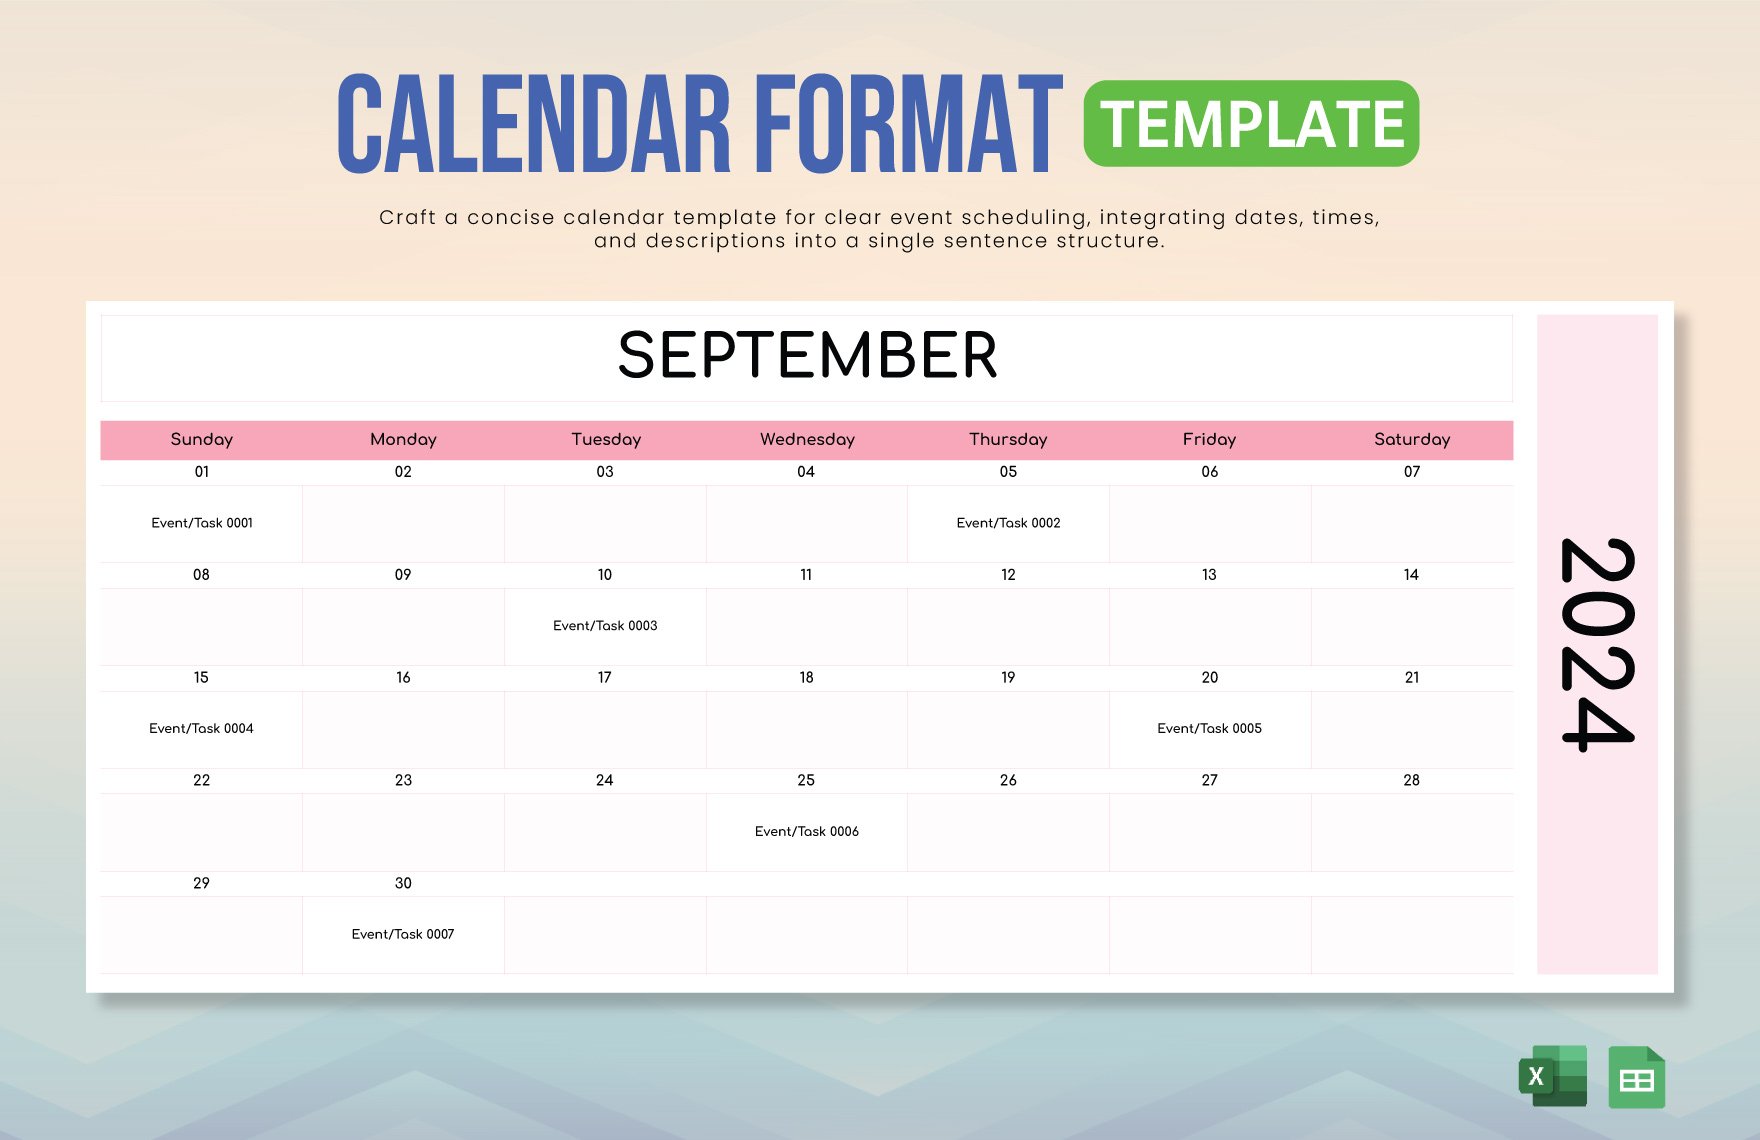 Free Calendar Format Template in Excel, Google Sheets